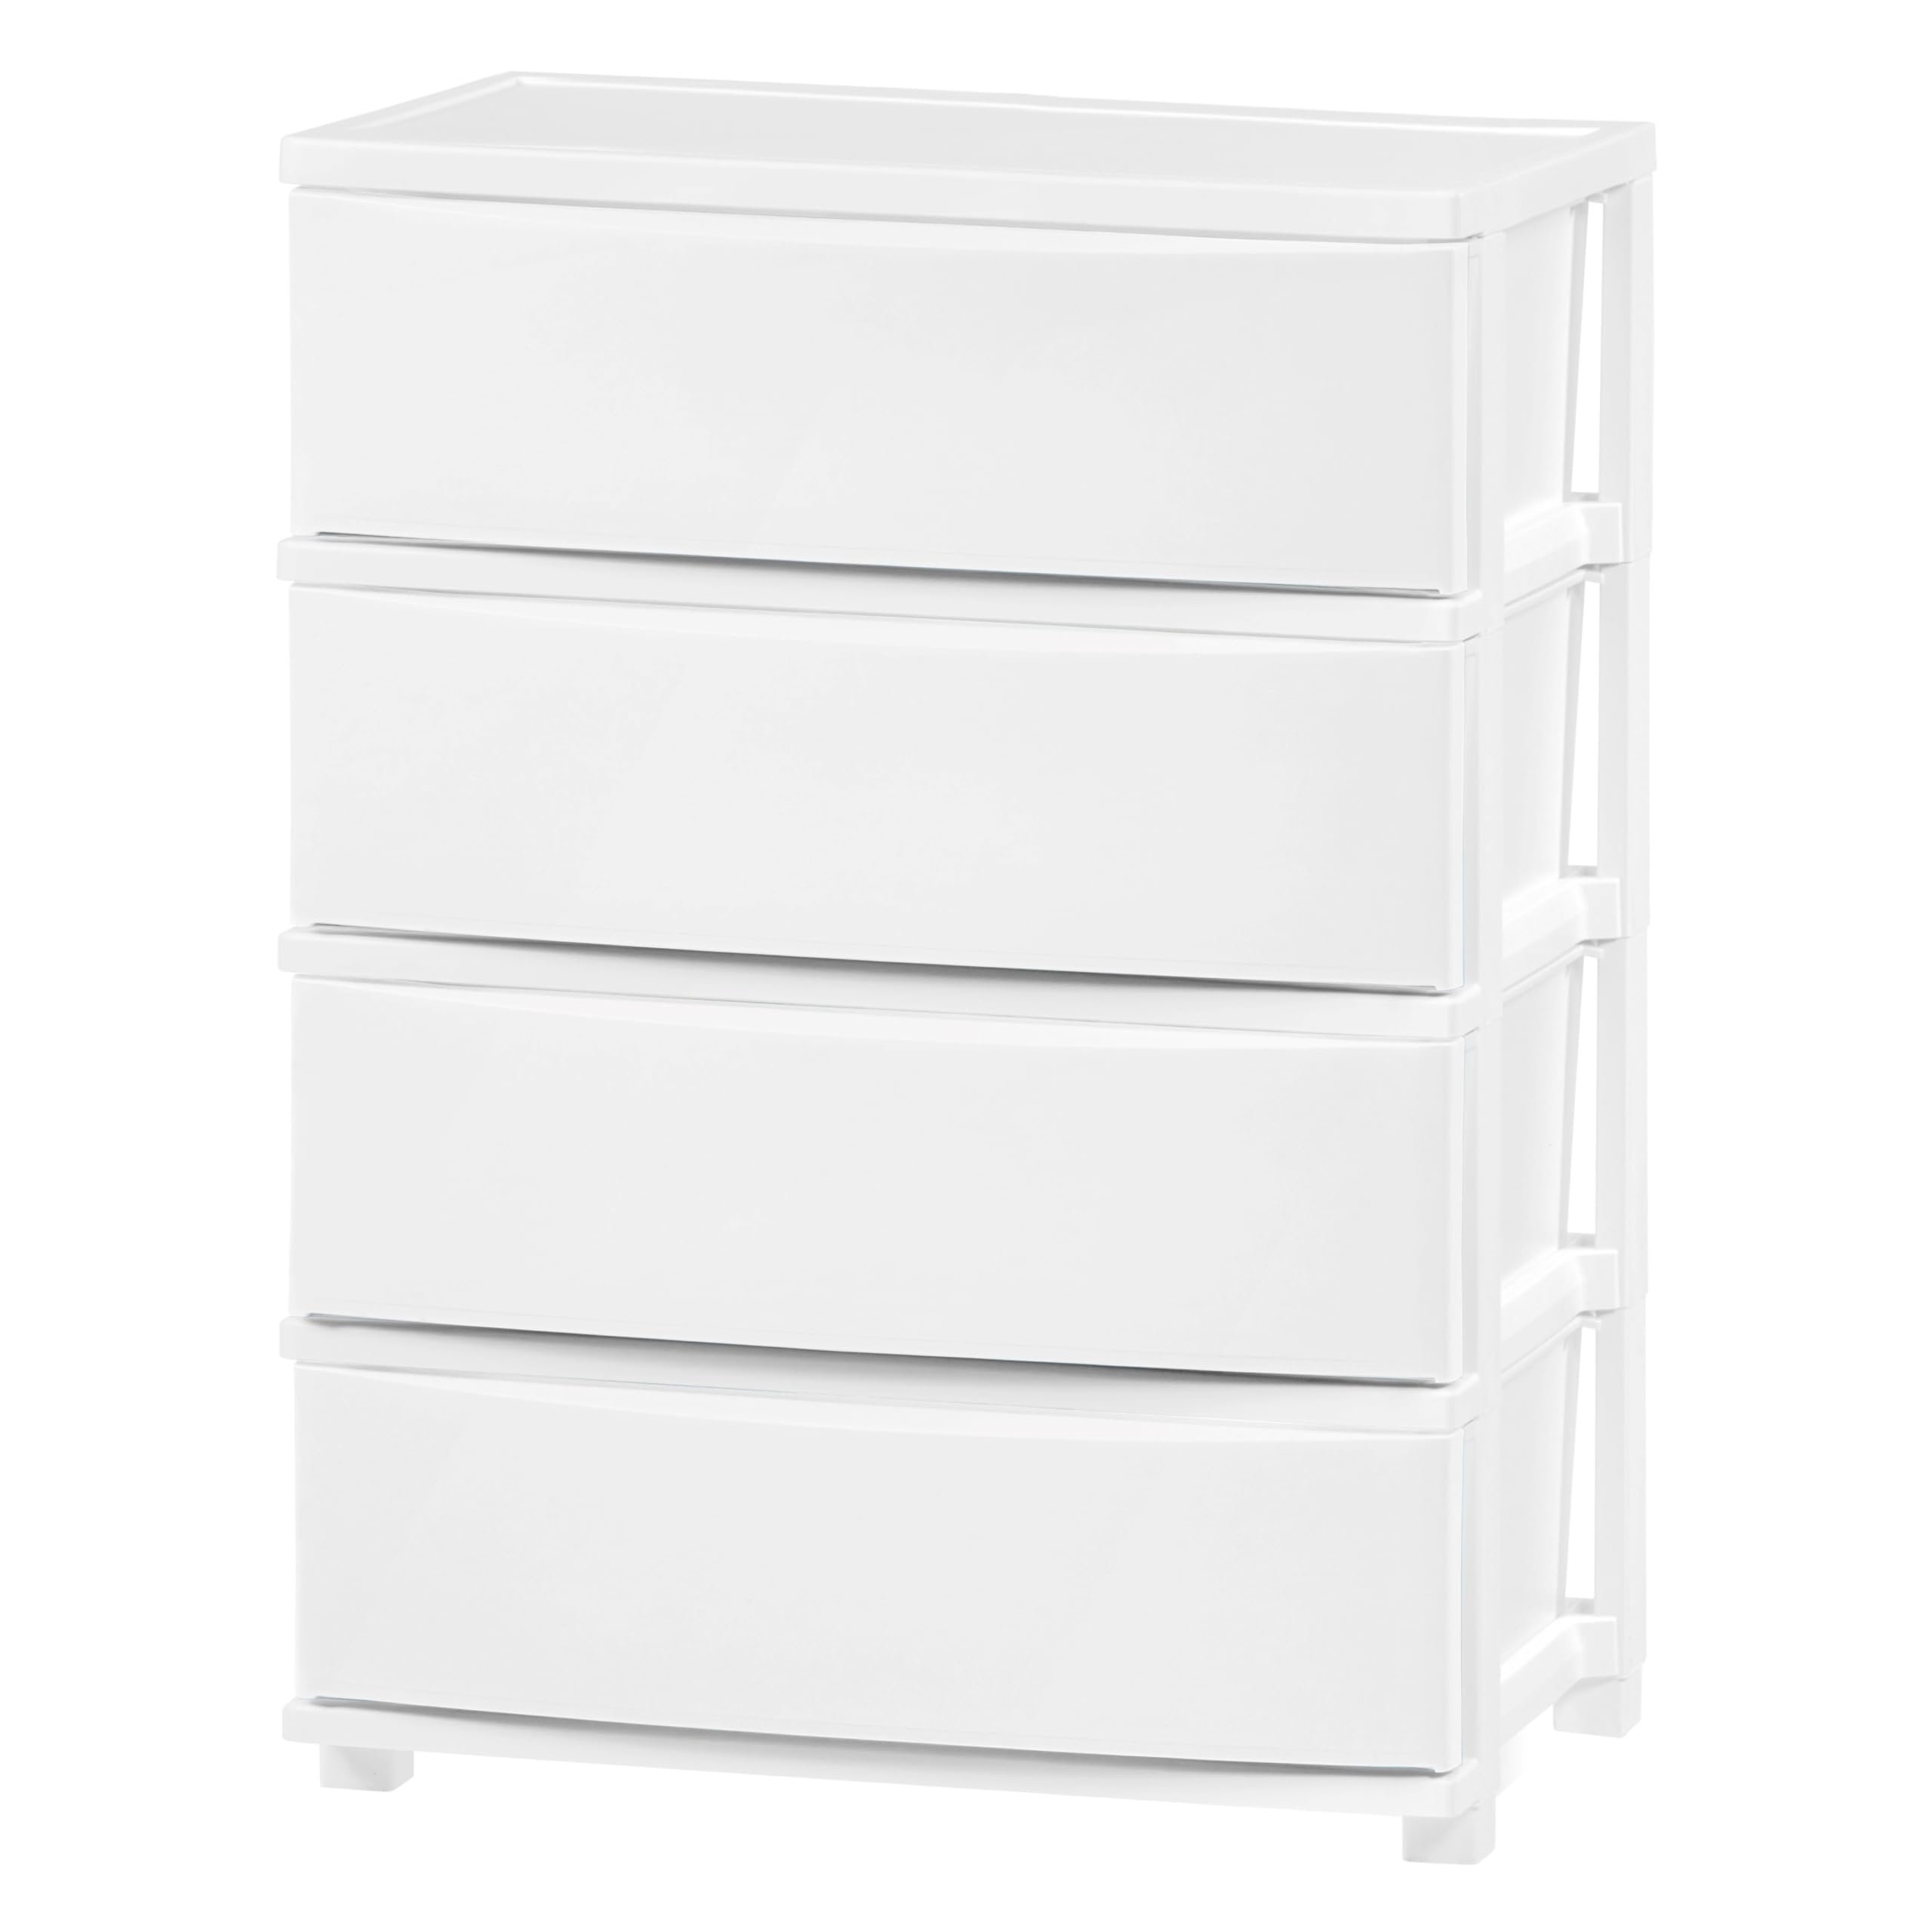 IRIS USA 4 Wide Plastic Drawer Storage with Casters